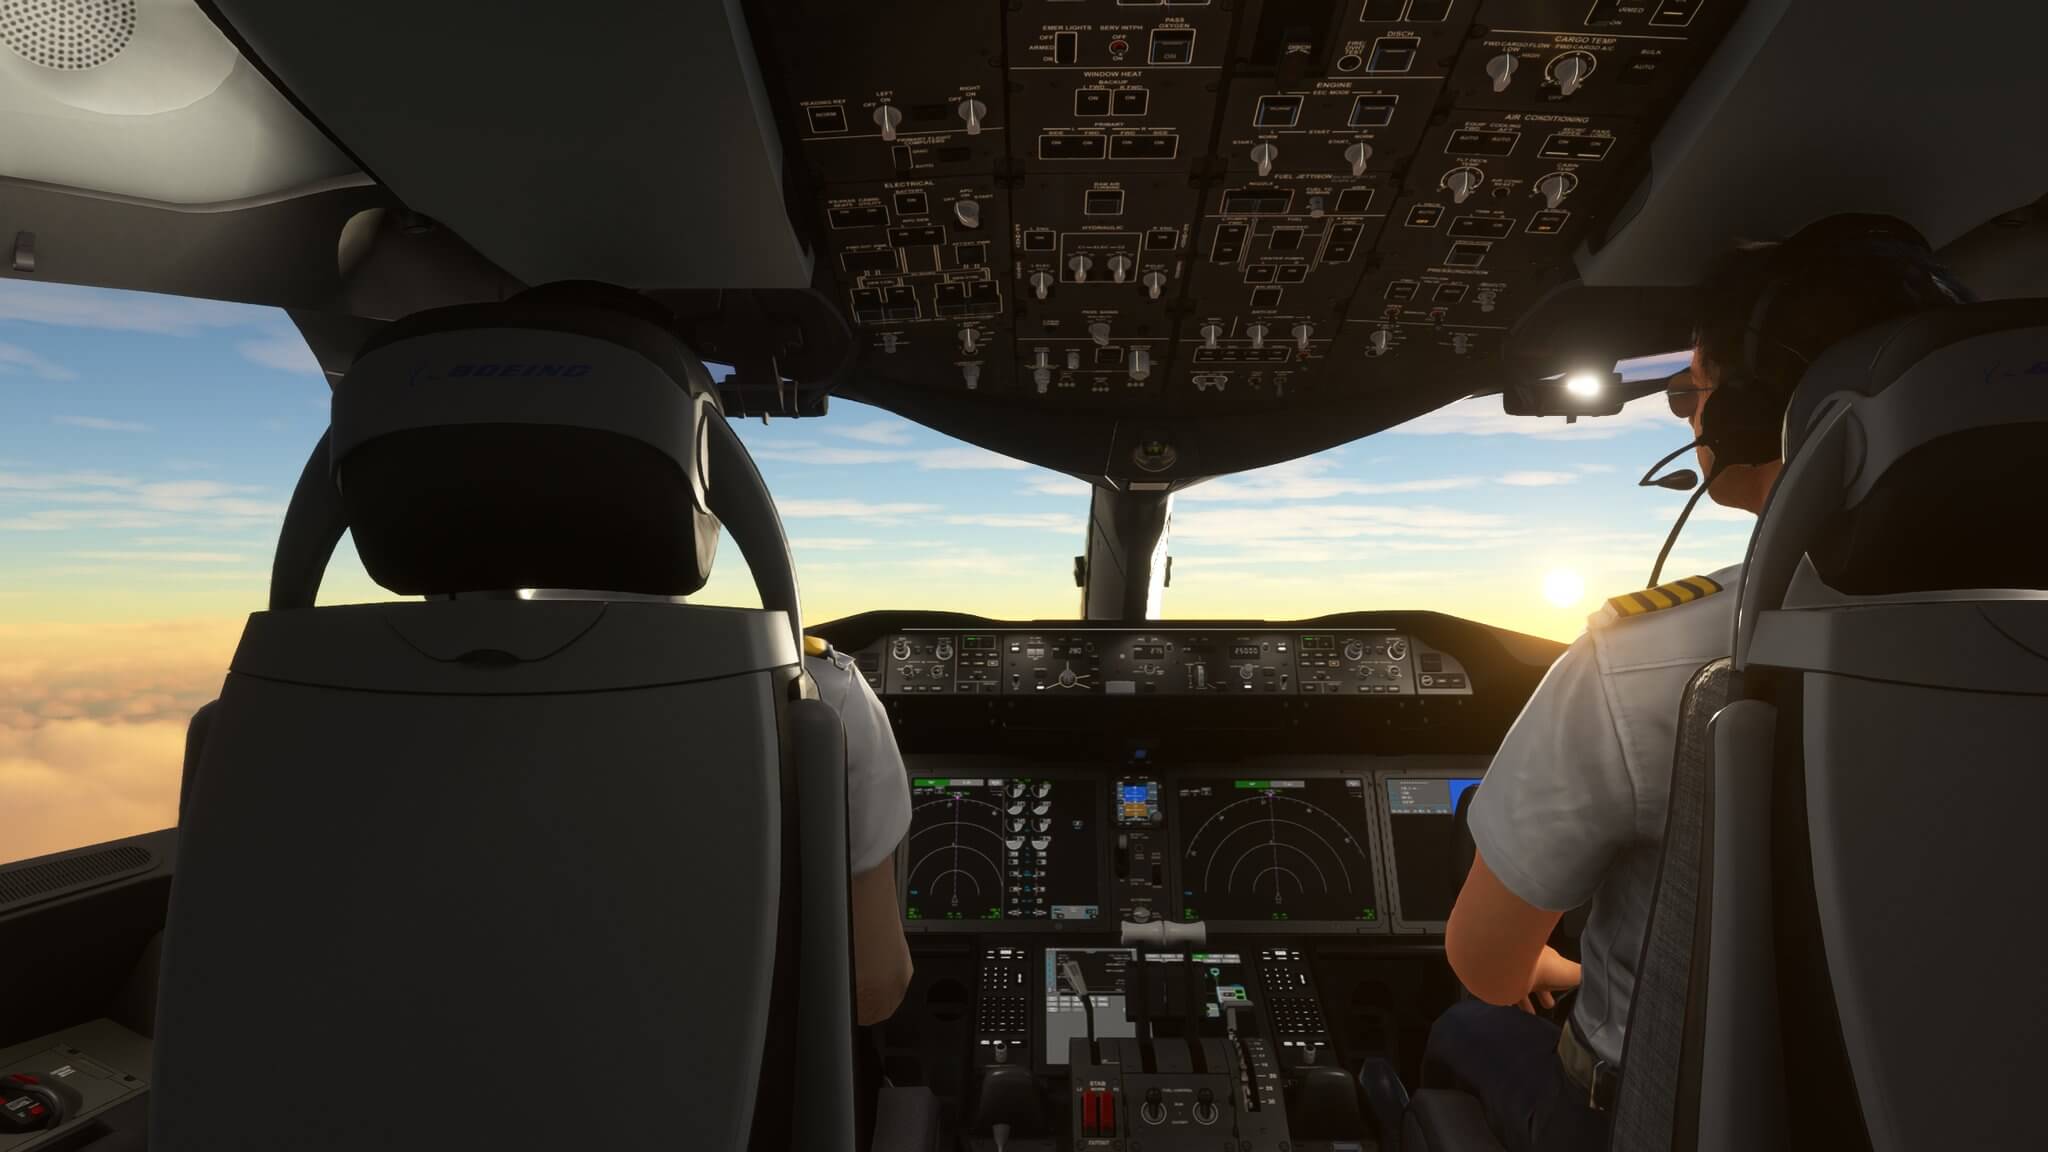 The flightdeck of a Boeing 787 is shown with the sun visible outside of the window blinding the pilots